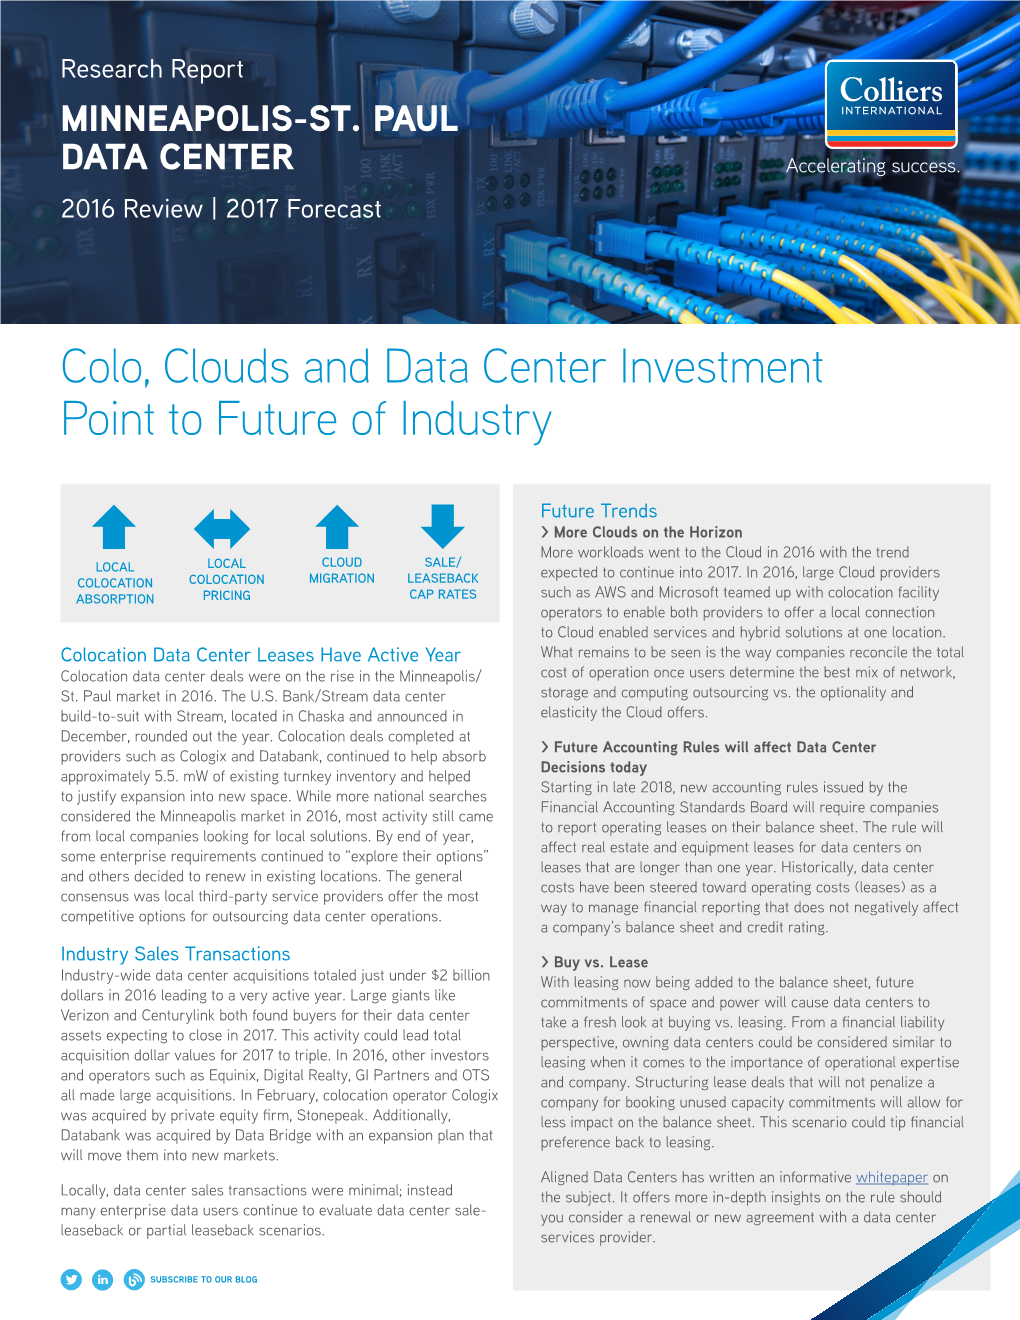 Colo, Clouds and Data Center Investment Point to Future of Industry